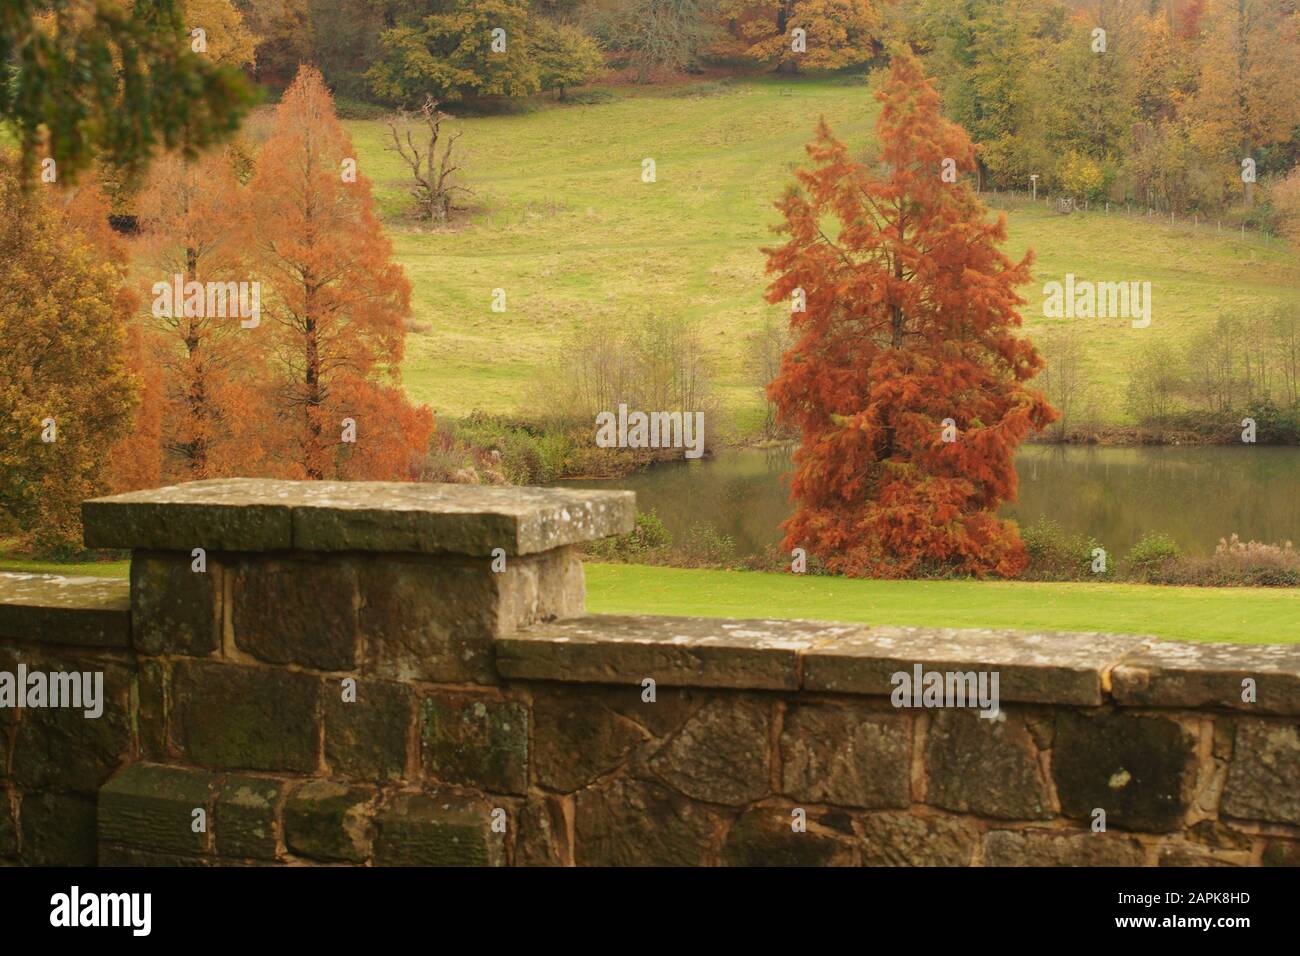 A view looking over a stone garden wall to sloping grass down to a lake with trees in their autumn colours and a woodland beyond Stock Photo